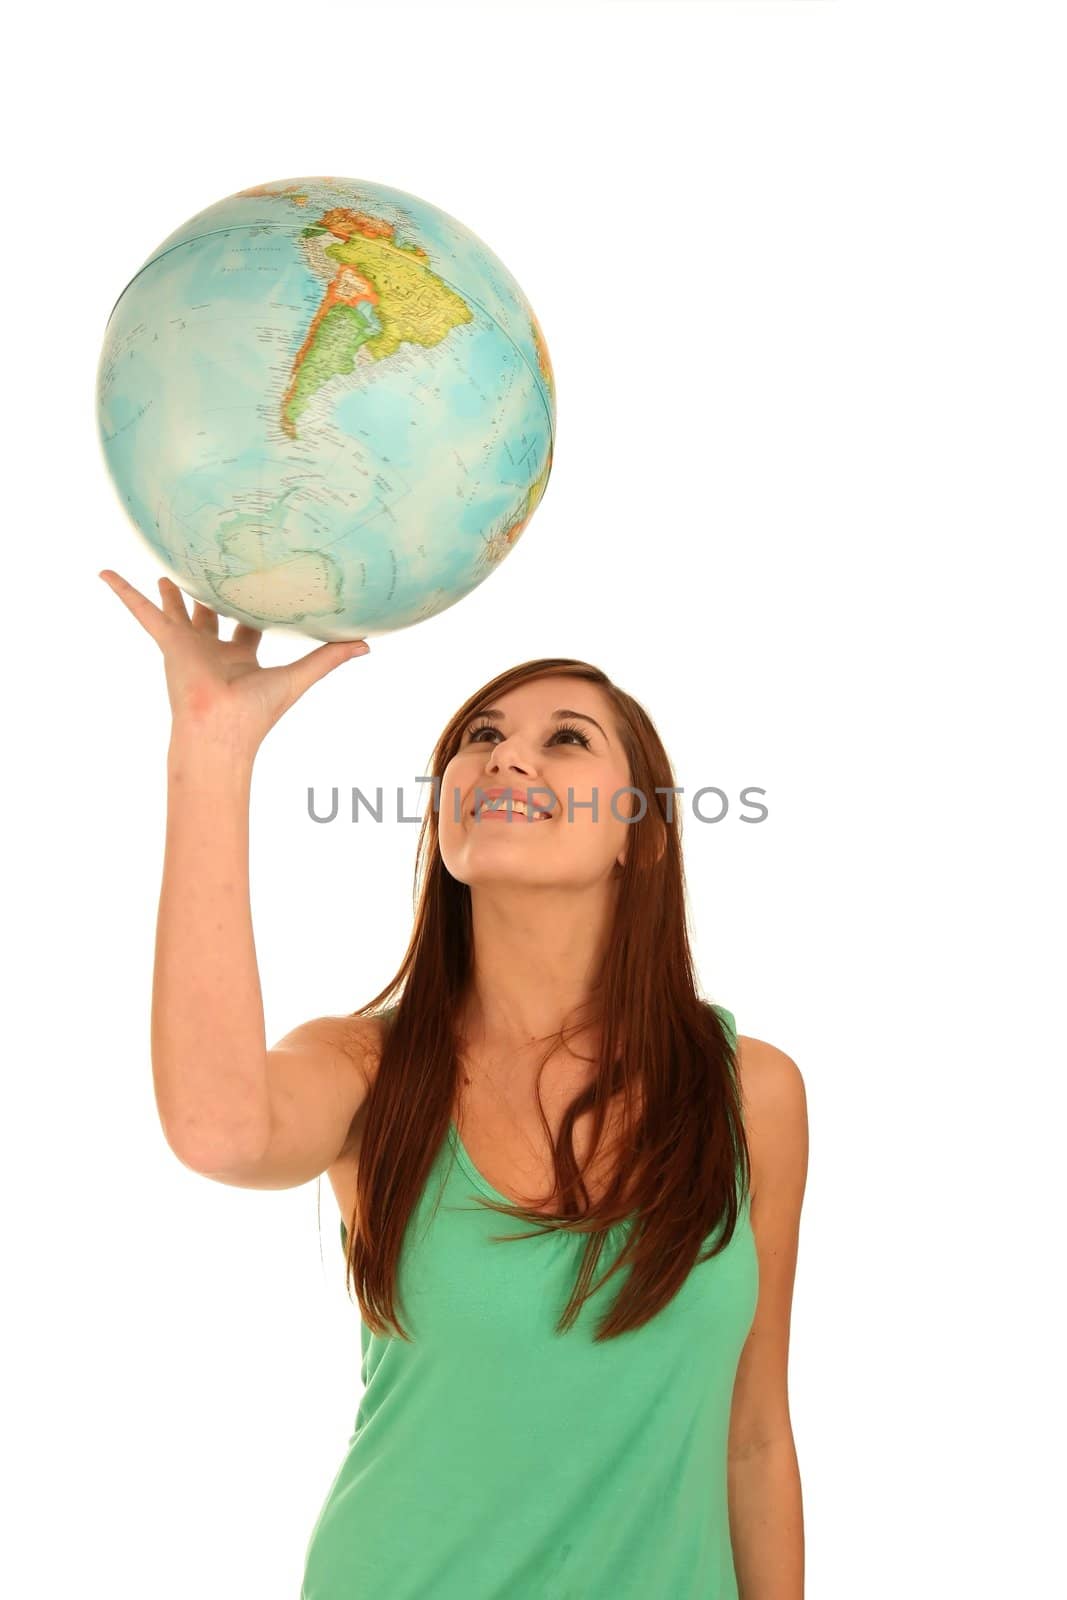 Pretty smiling young woman spinning the globe on her hand